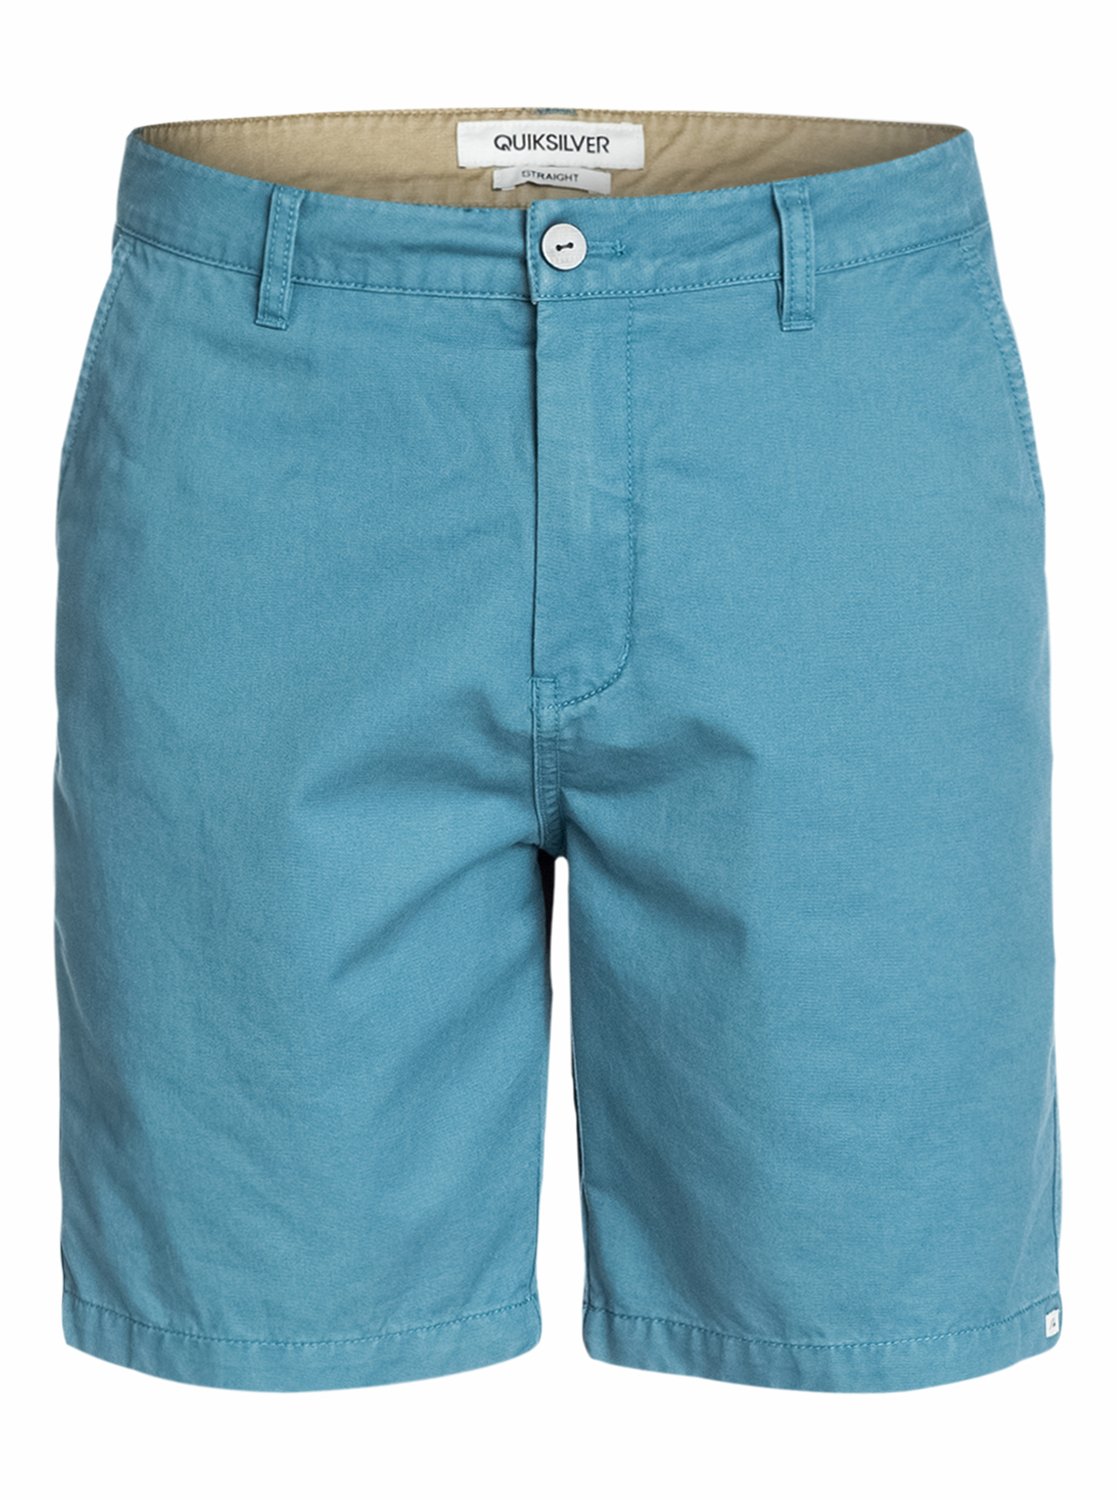 Everyday Chino Short - Quiksilver -  Quiksilver -     2015. :  ,    (227 /. ), 4 .<br>